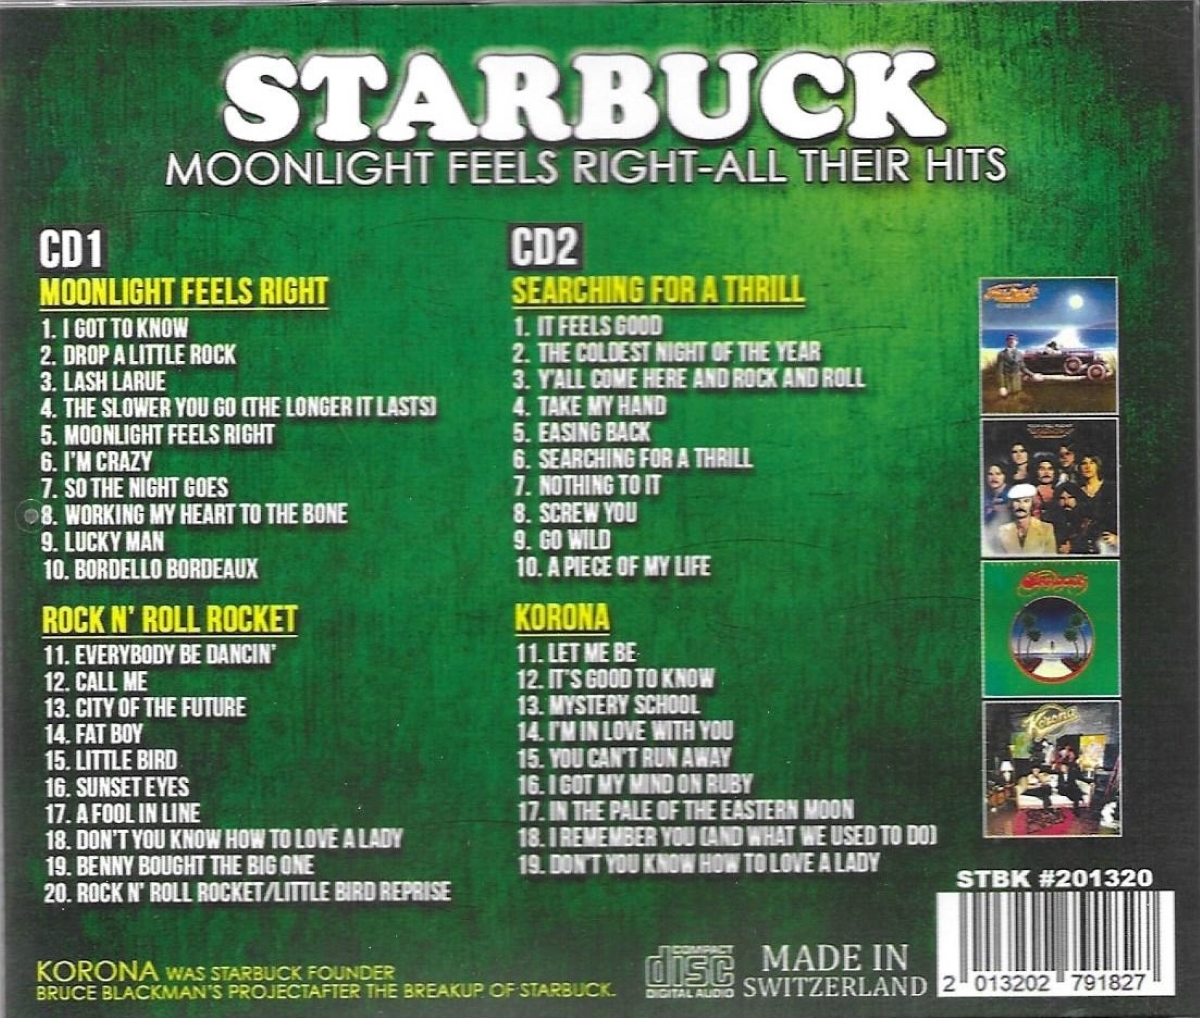 Moonlight Feels Right - All Their Hits-4 LPs on 2 CDs (2 CD) - Click Image to Close